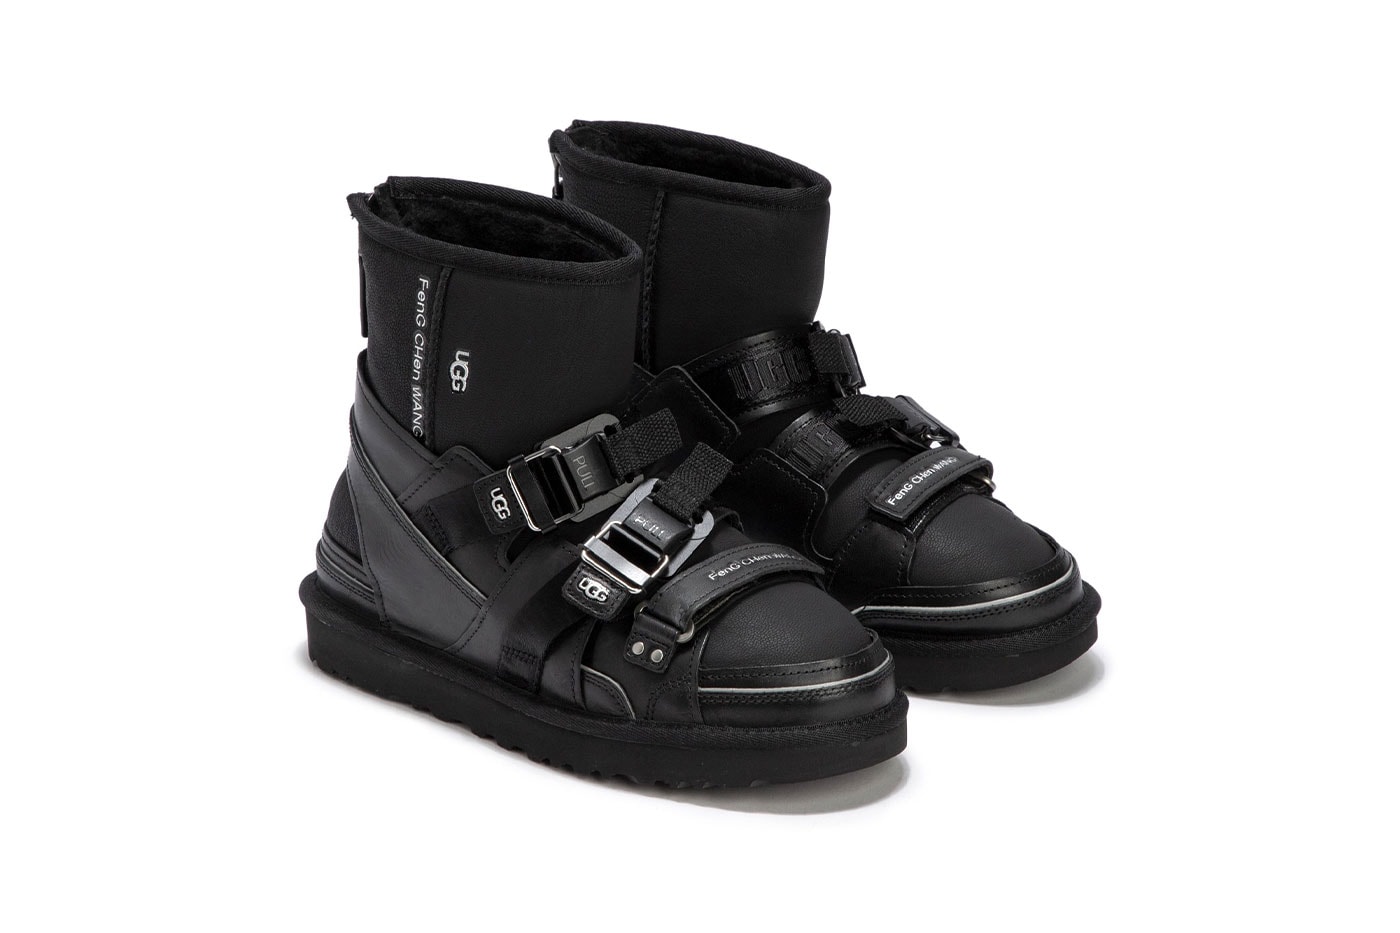 Feng Chen Wang UGG Sandal HBX Release Black Price Info 3-in-1 Winter Boots 